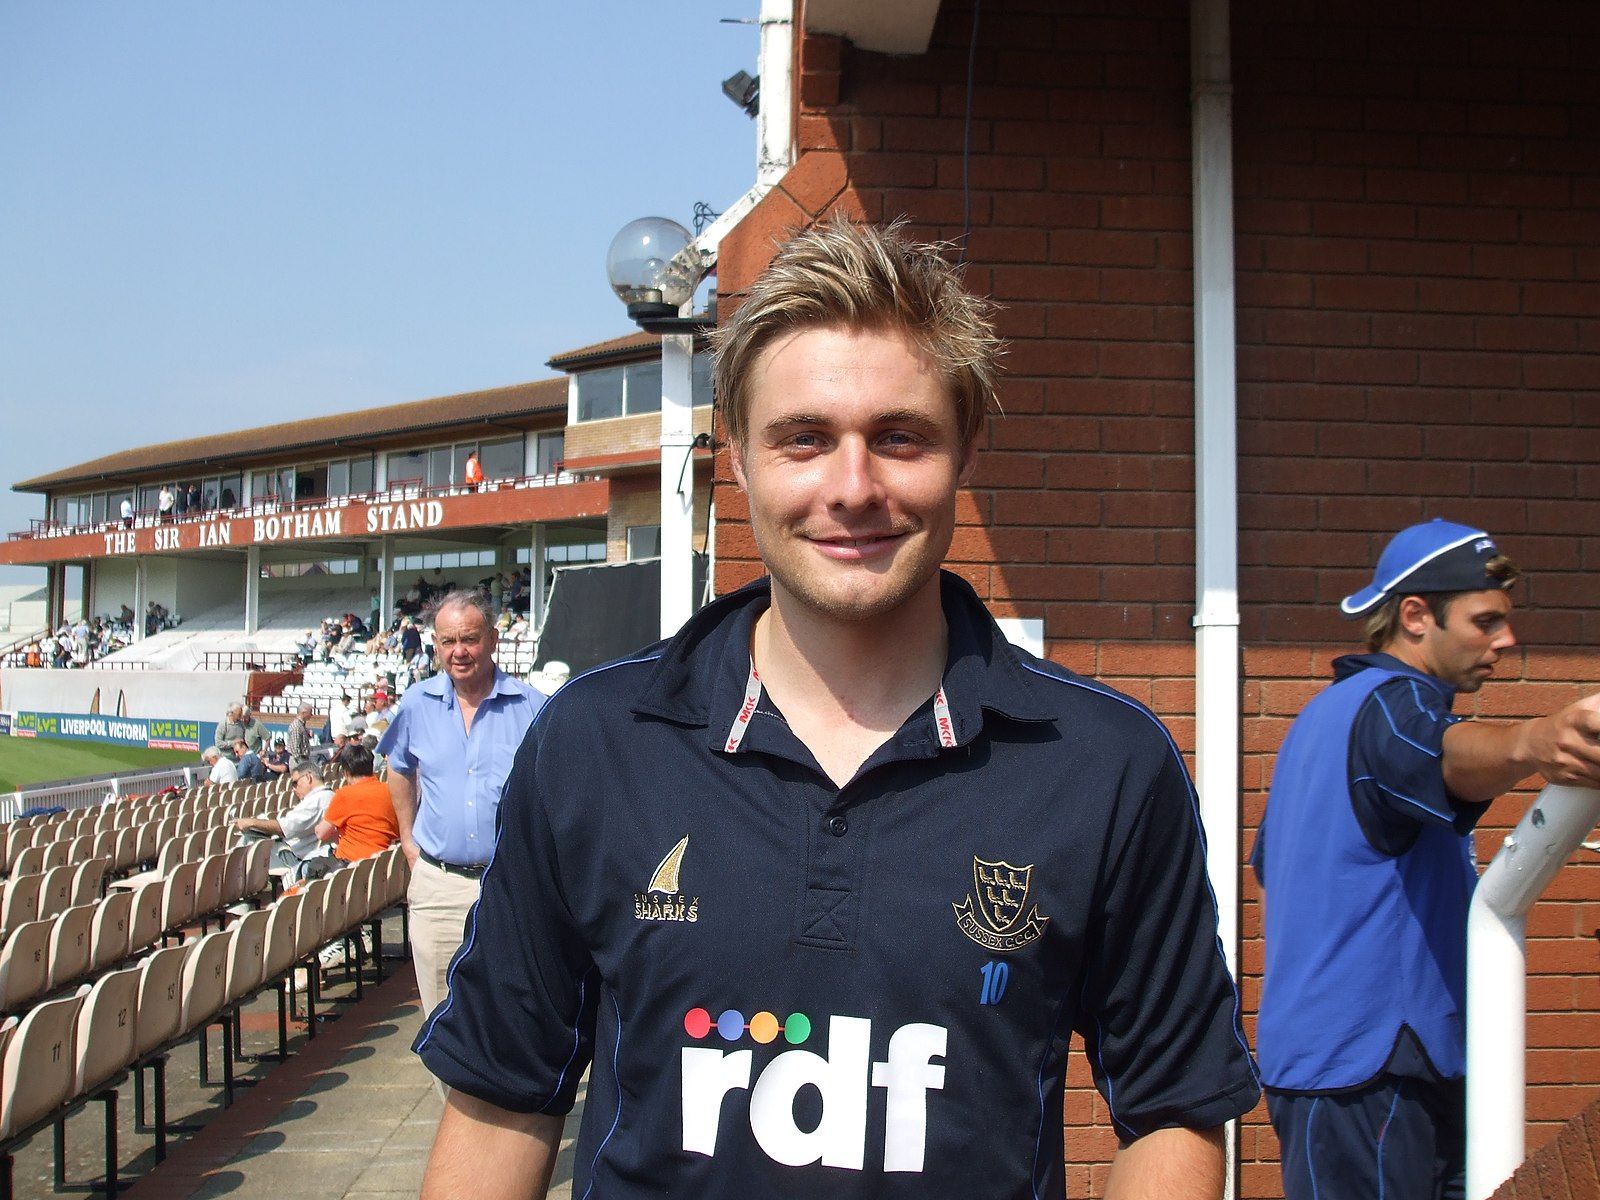 A picture of the cricketer Luke Wright